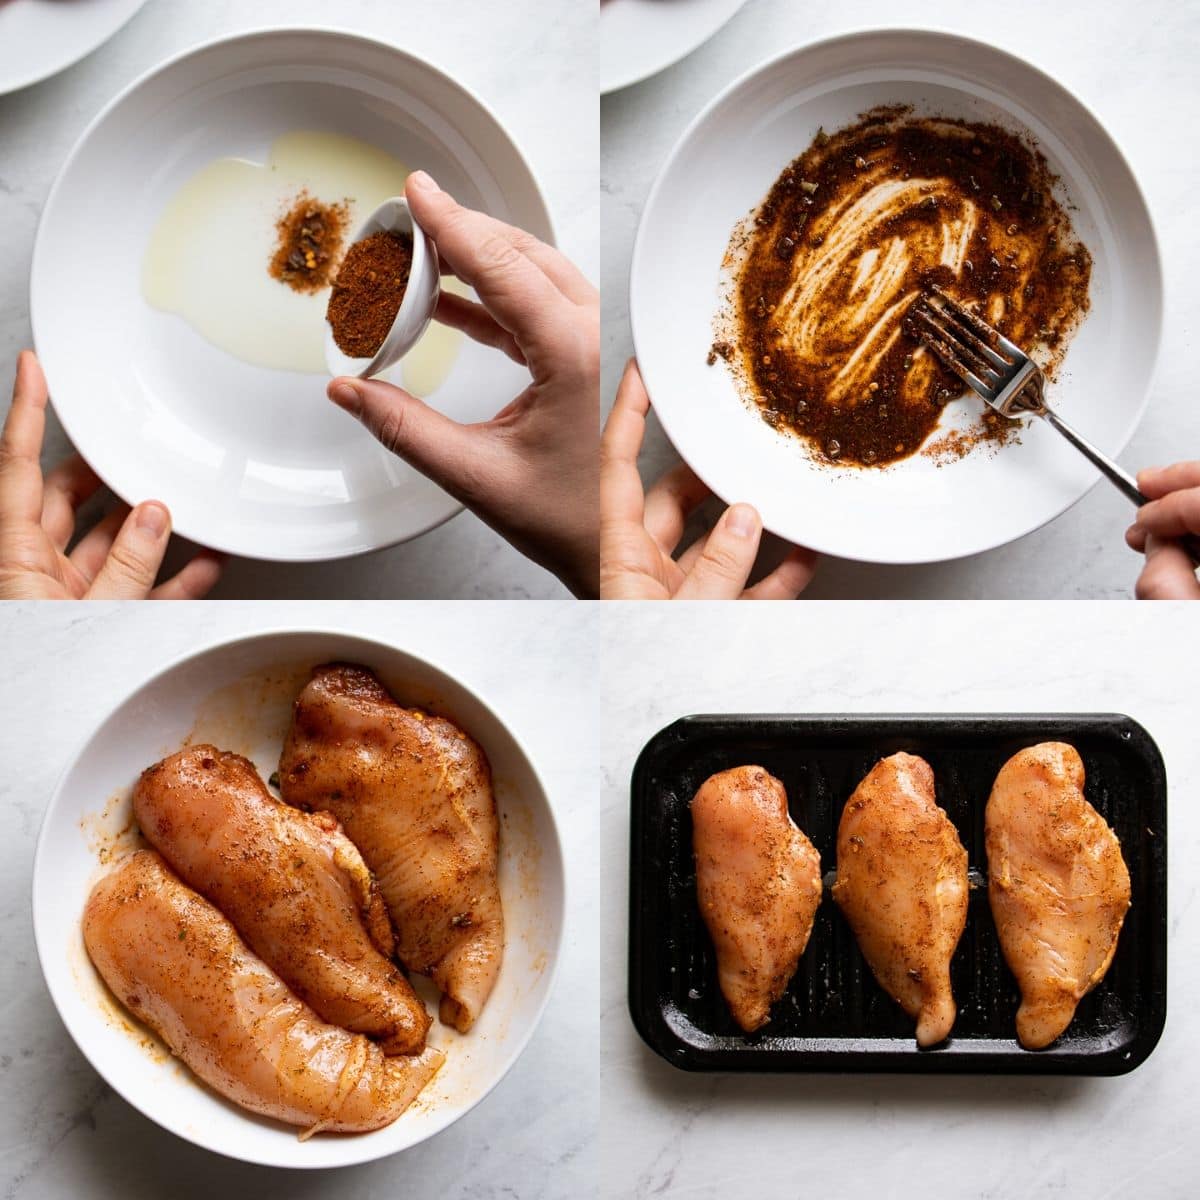 Four pictures depicting how to prepare seasoned chicken for the broiler. In the first picture, spices are being added to oil. In the second picture, the oil and spices are mixed together to form a paste. In the third picture, the chicken is rubbed with the spice paste. And, in the final picture, the spiced chicken is placed on an oiled broiler pan.